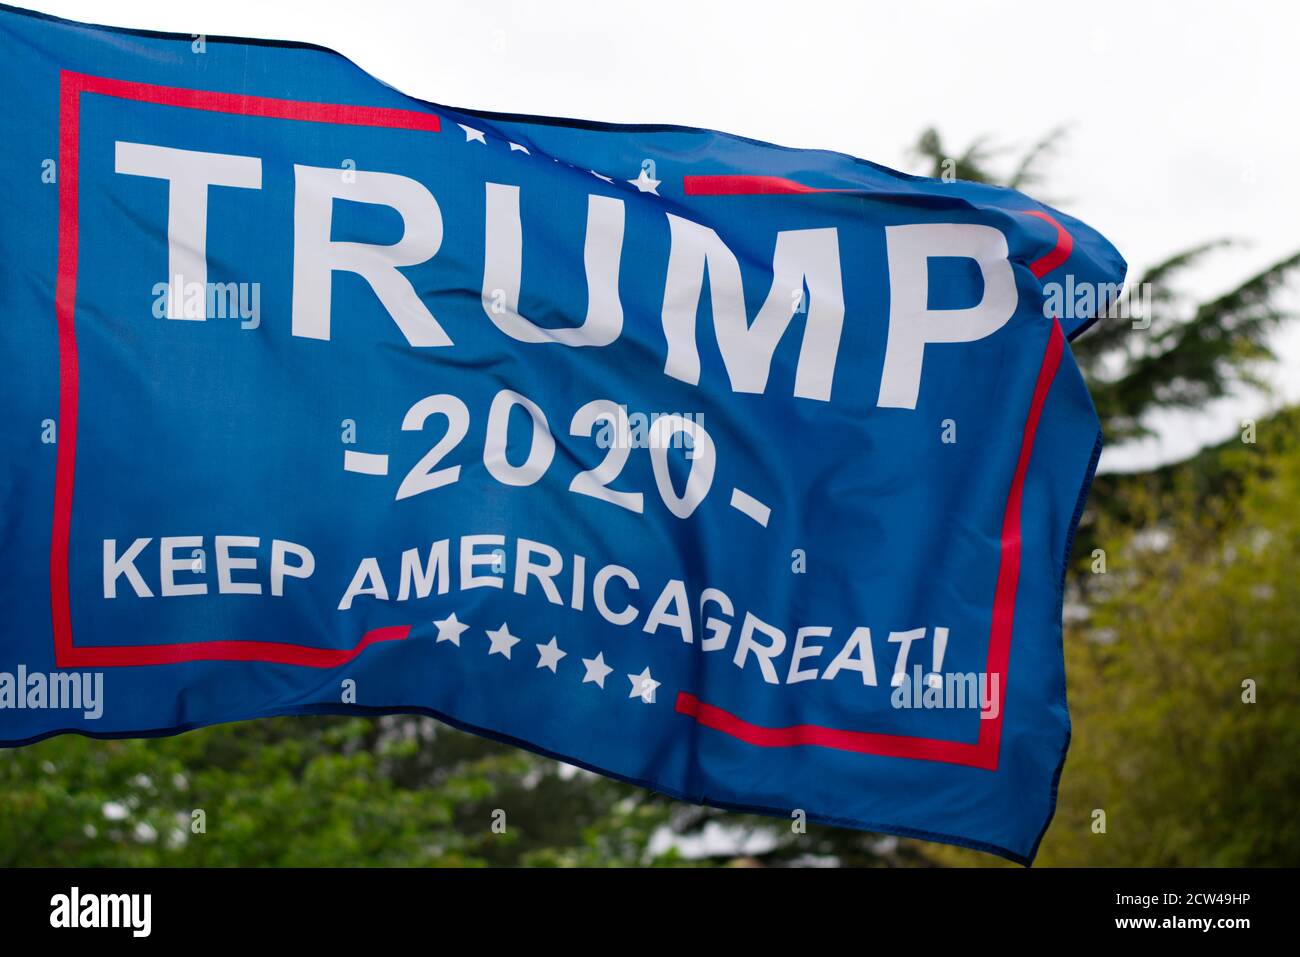 Flag for the American Elections 2020 between Donald Trump (Republican) and Joe Biden (Democrate). Background with trees and sky out of focus. Stock Photo